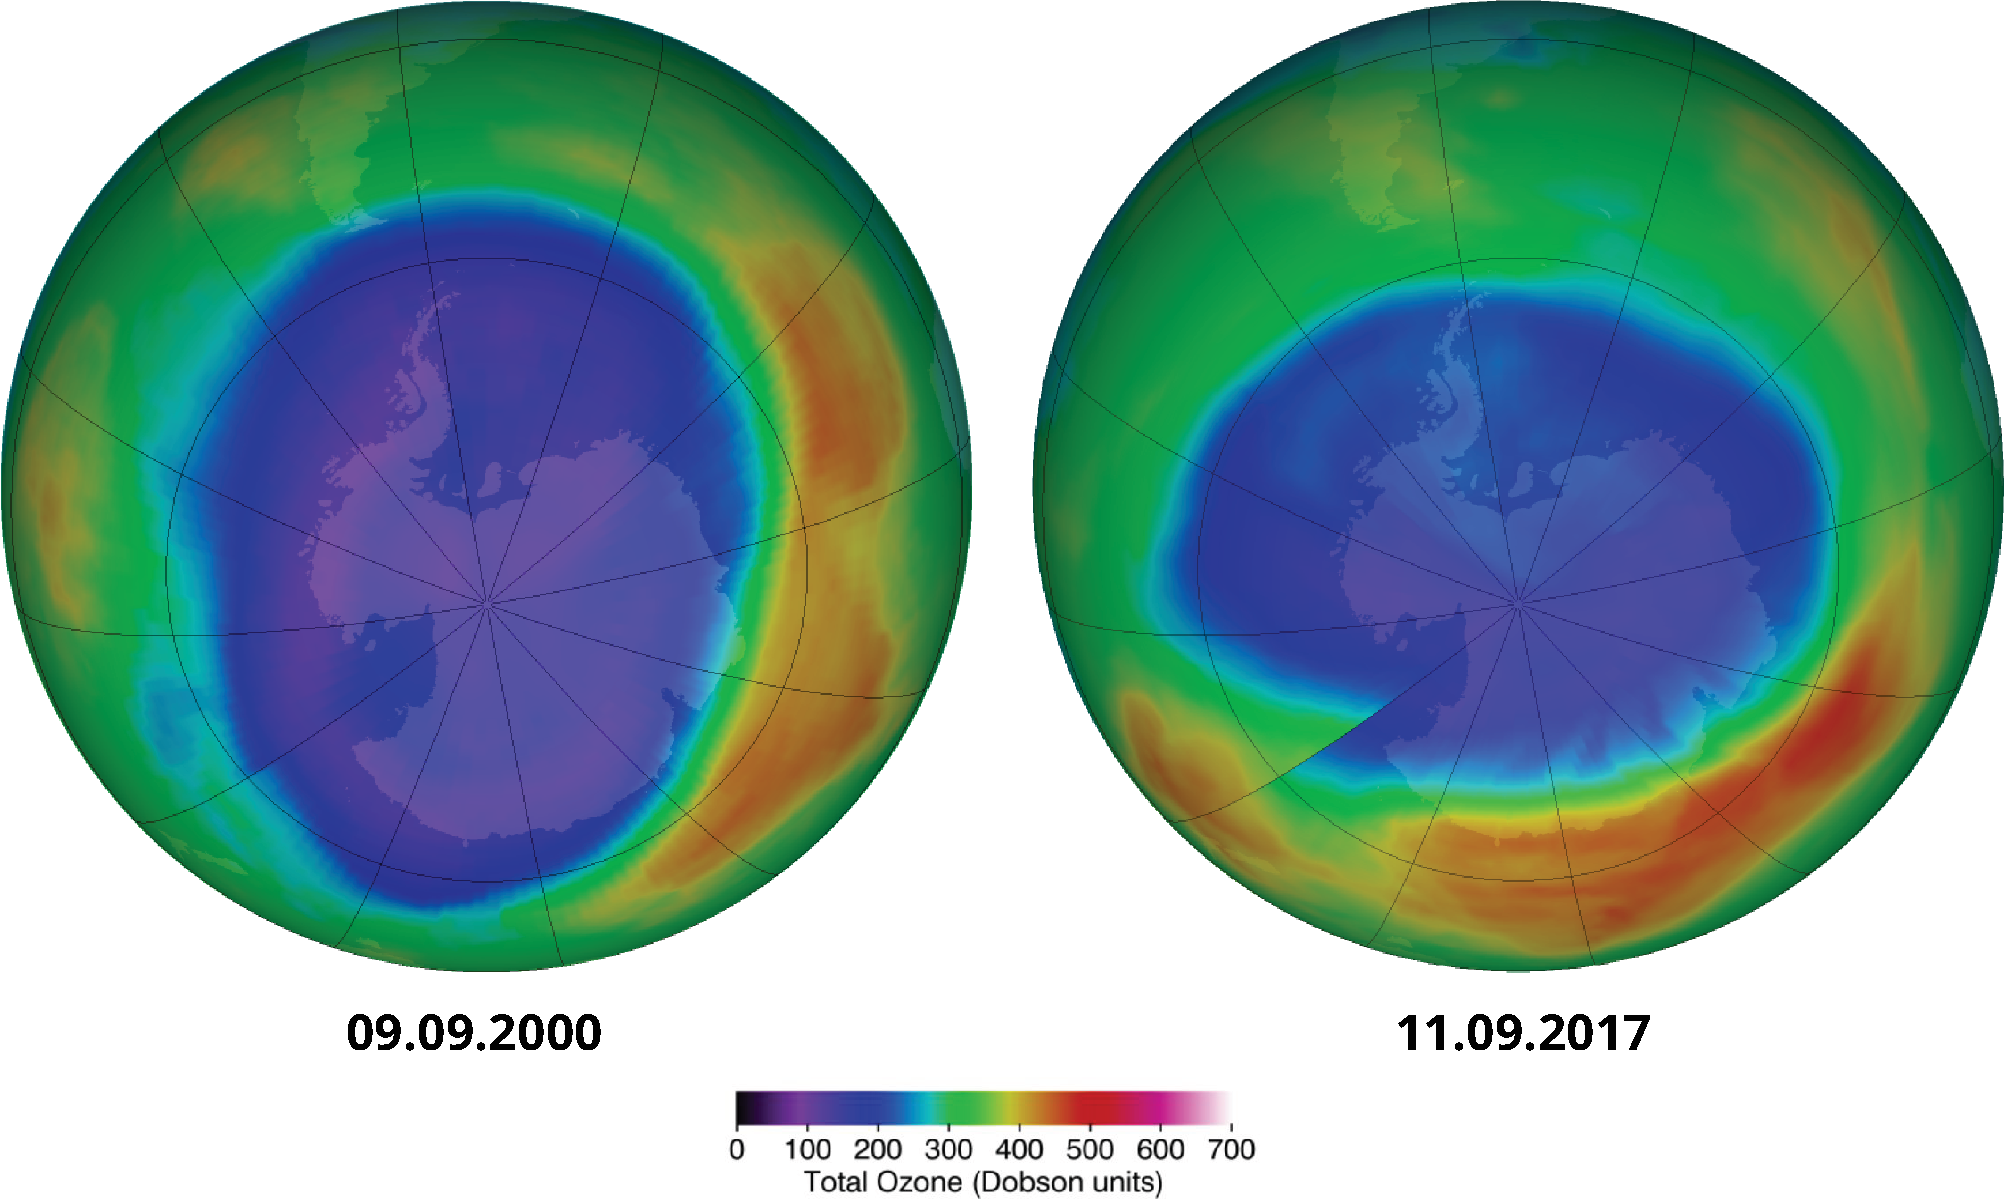 Maximum ozone hole area over the southern hemisphere, historically (9 September 2000) and currently (11 September 2017)